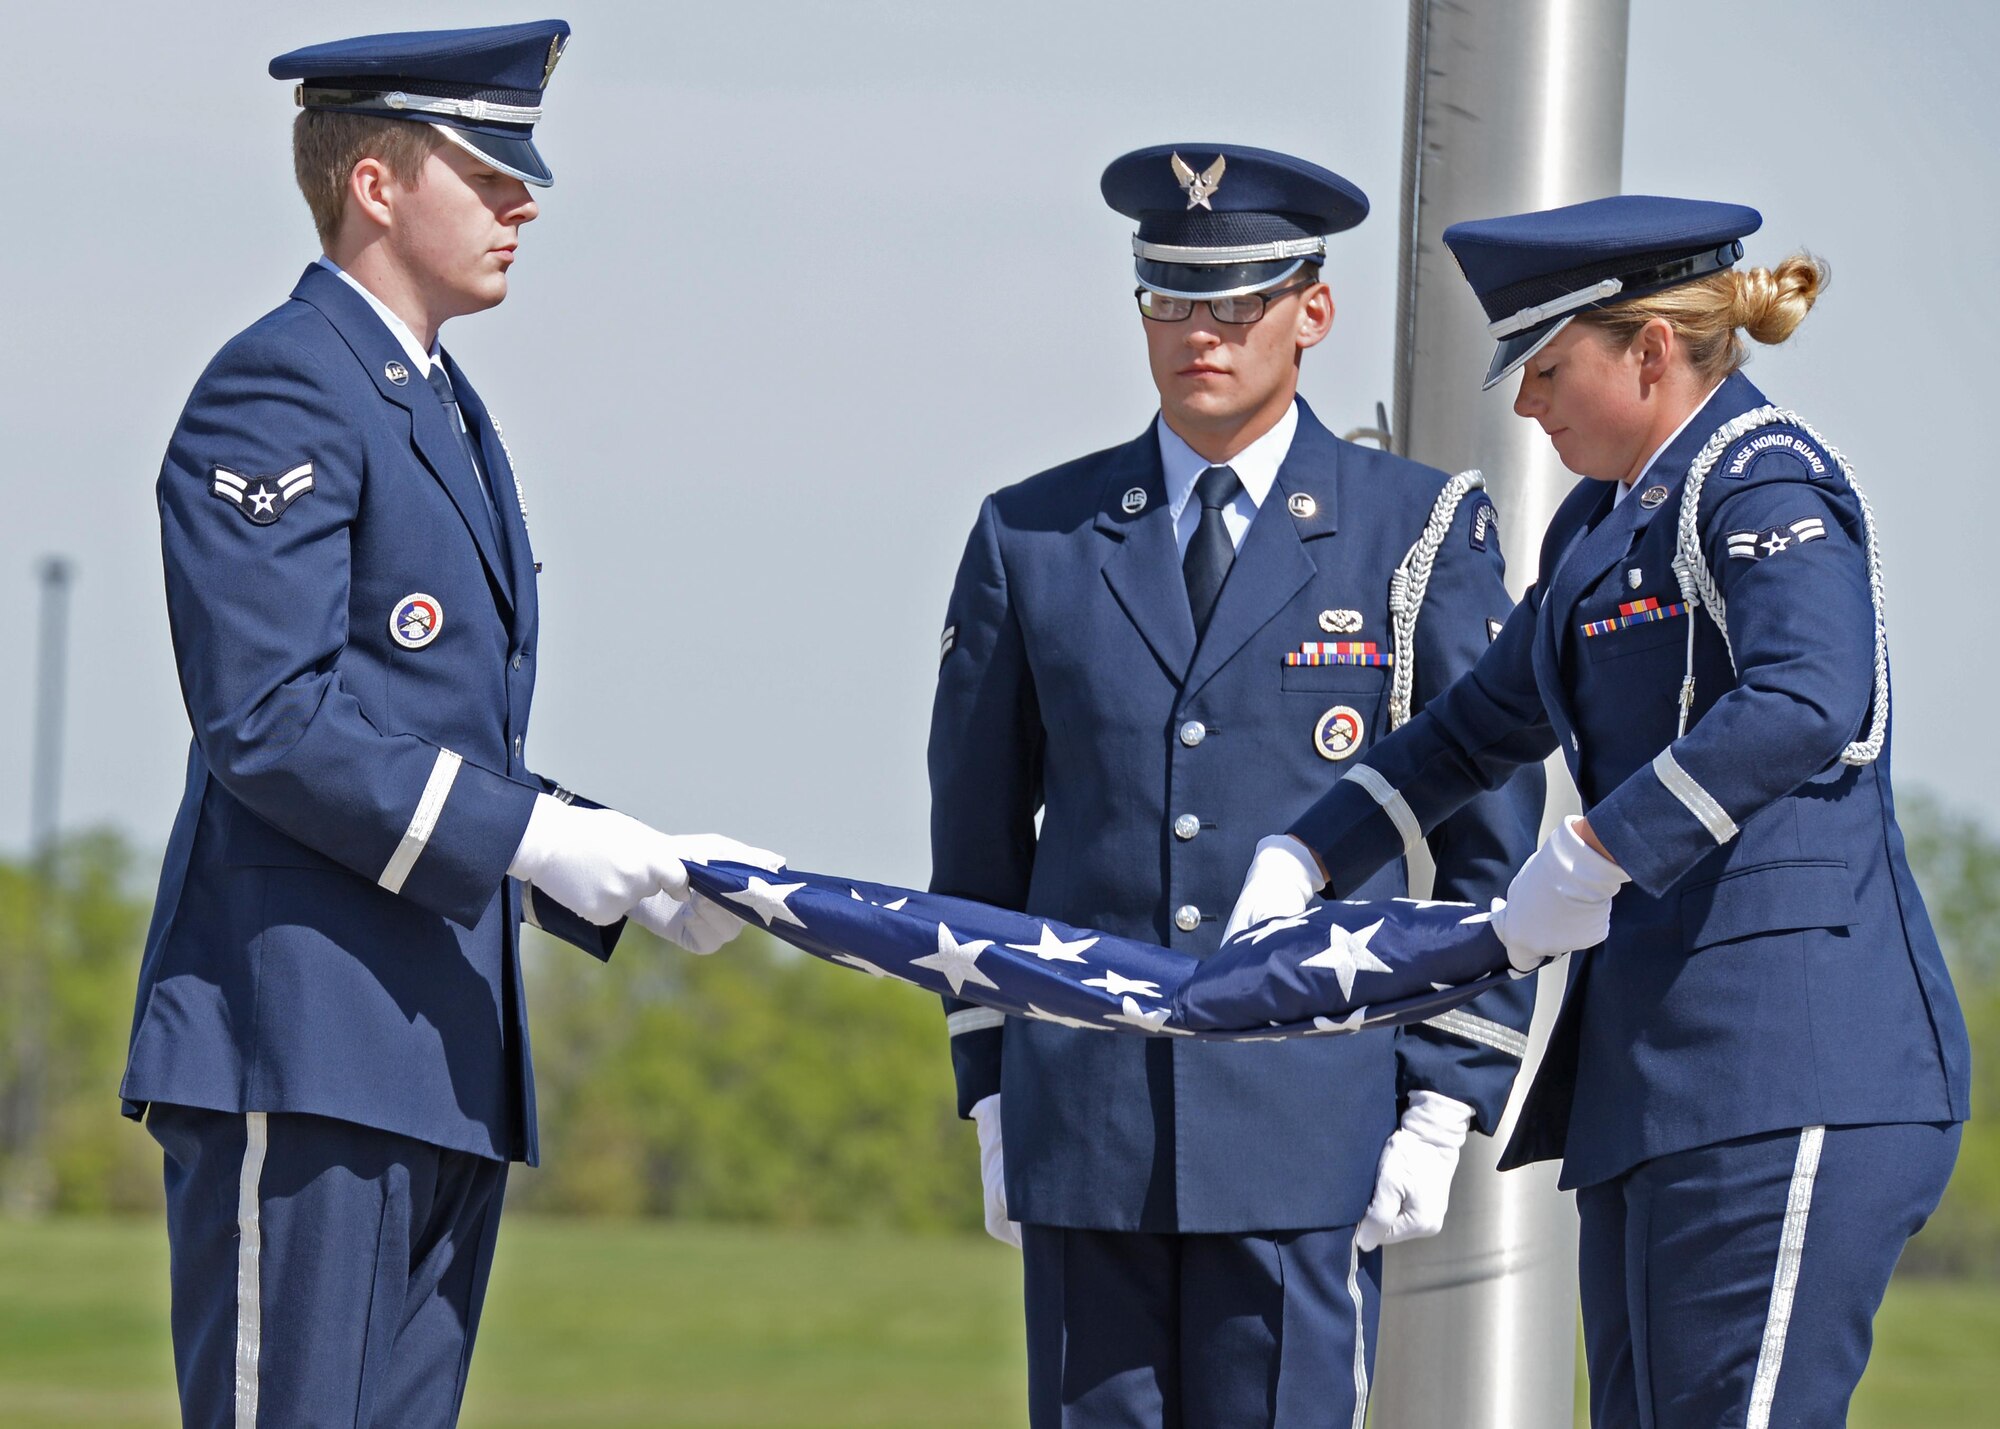 Minot Air Force Base, N.D., Honor Guard Airmen fold the flag during the National Police Week retreat ceremony May 19, 2017. A retreat ceremony is the daily military practice of lowering the flag. (U.S. Air Force photo/Airman 1st Class Austin M. Thomas)